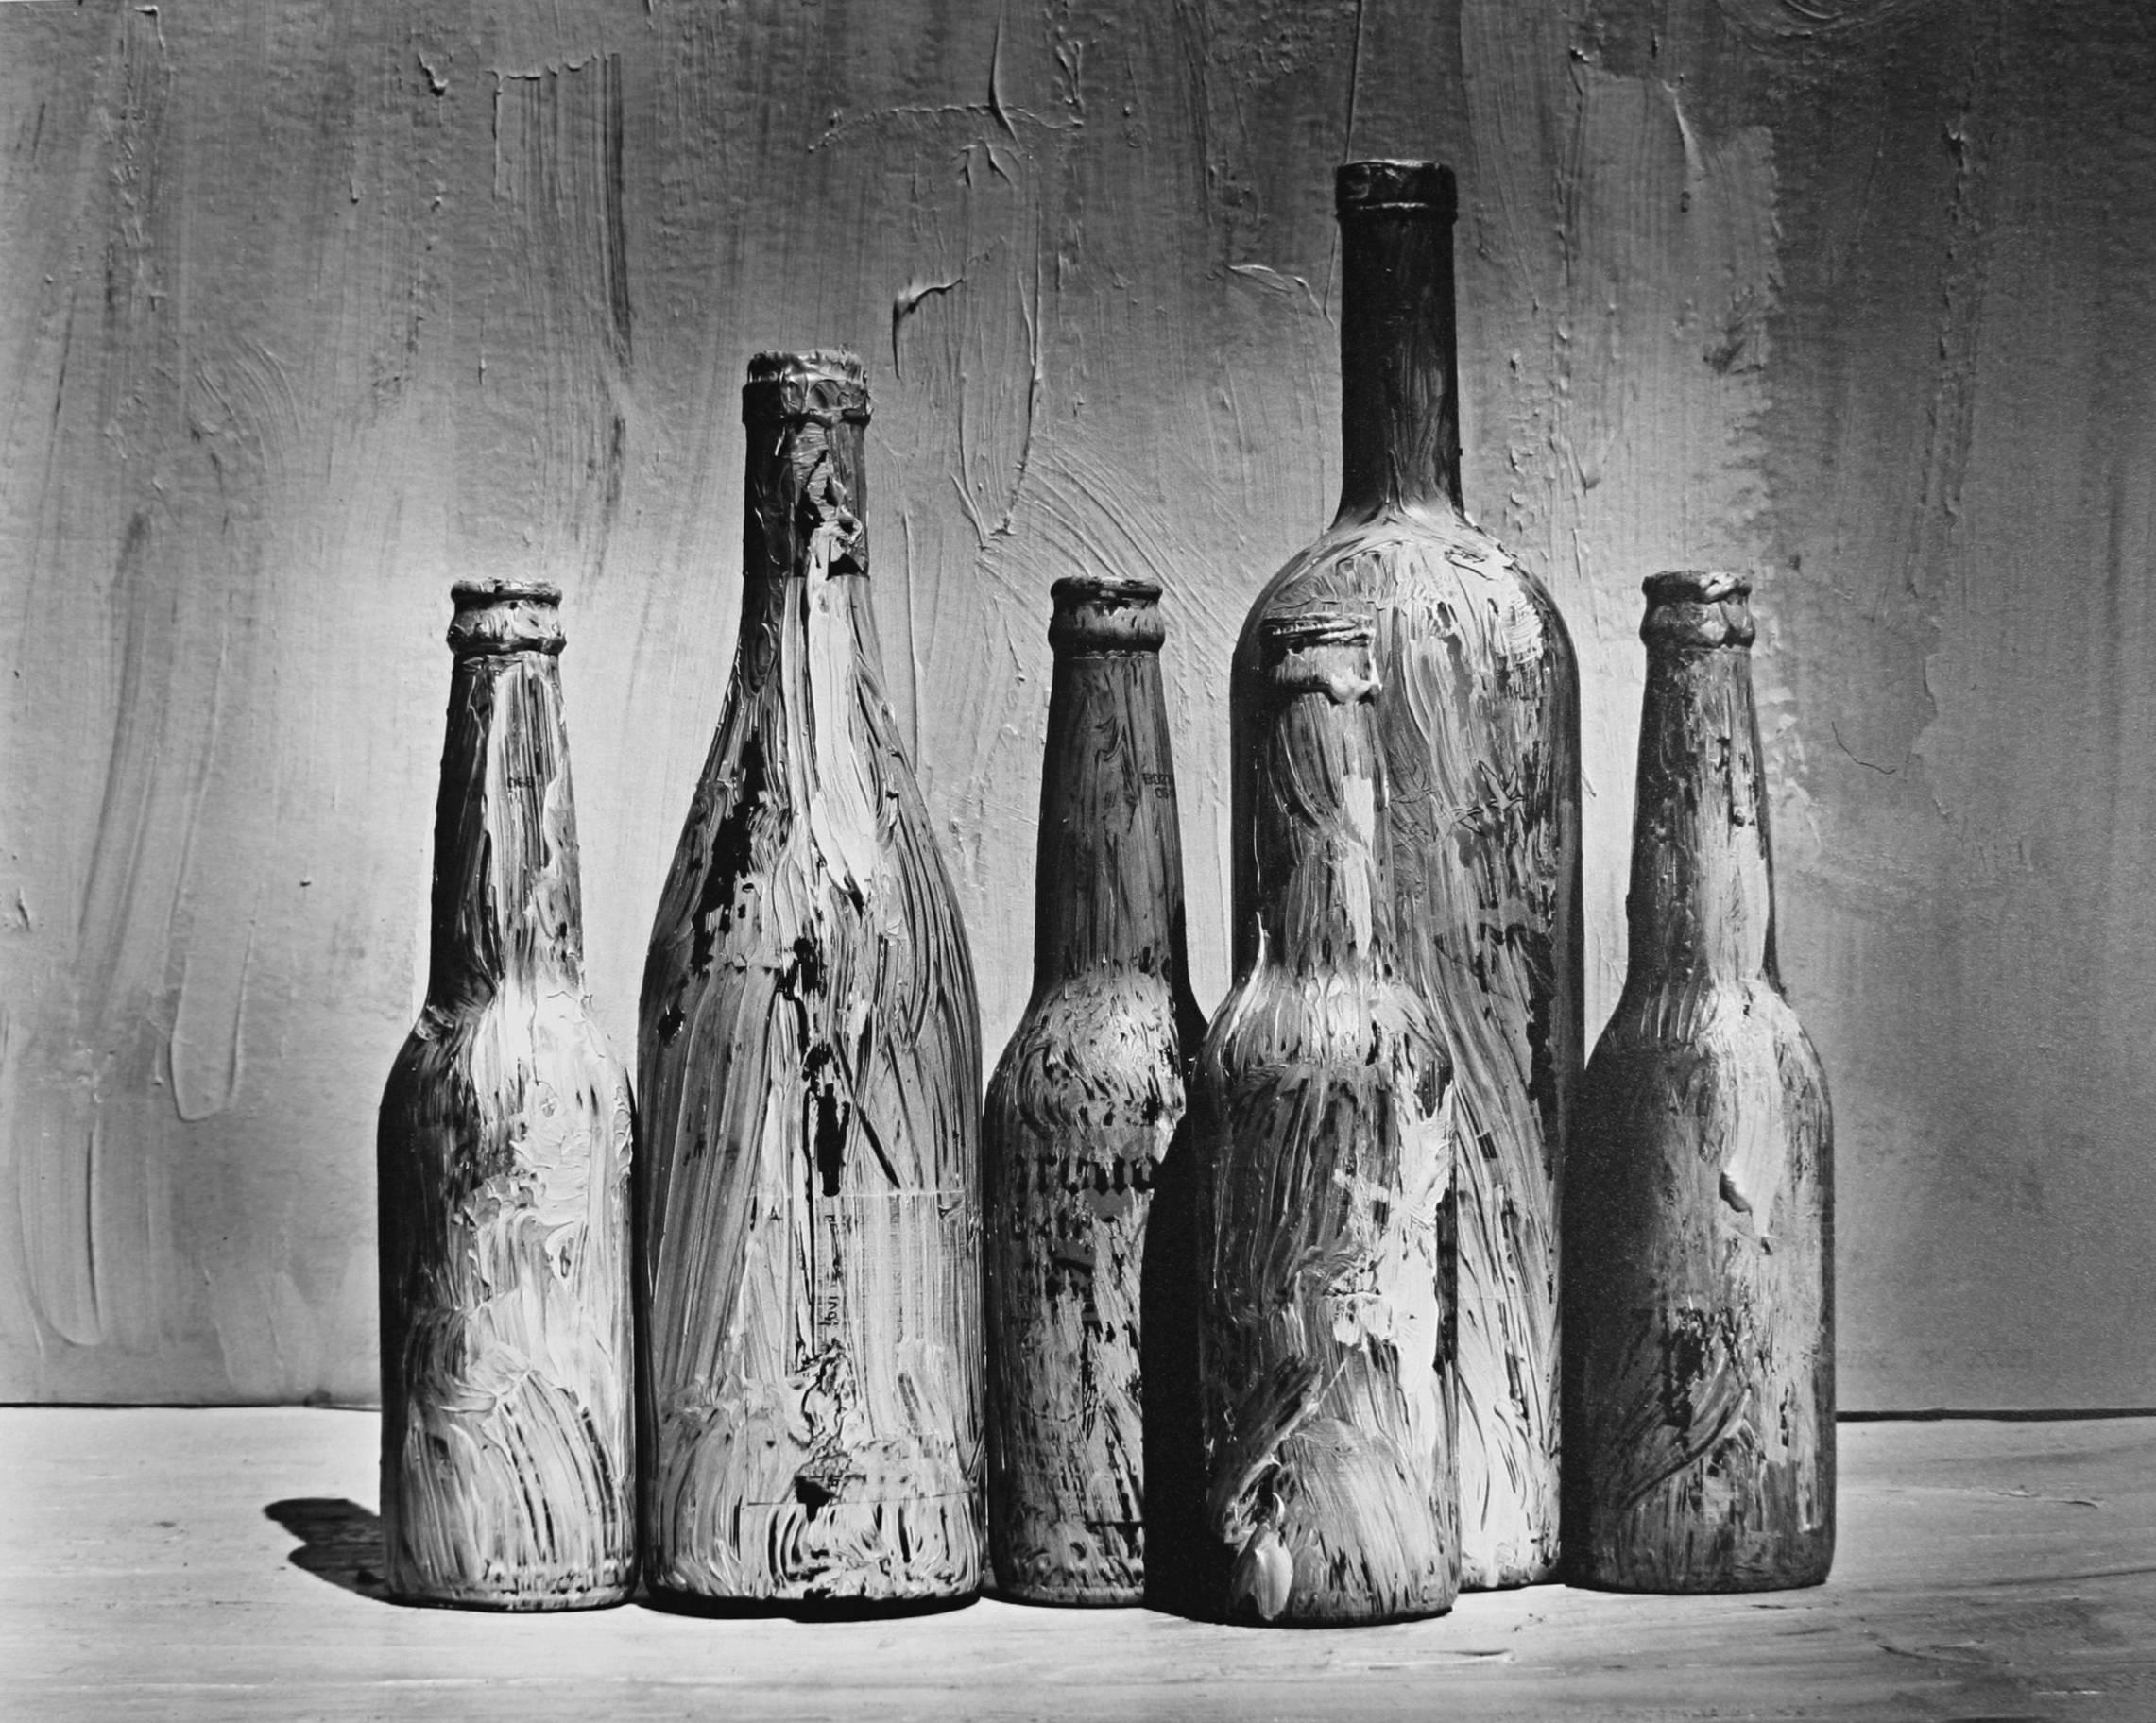 Alexandra Catiere Still-Life Print - Homage to Morandi, Black and white still life photography, Painted Bottles